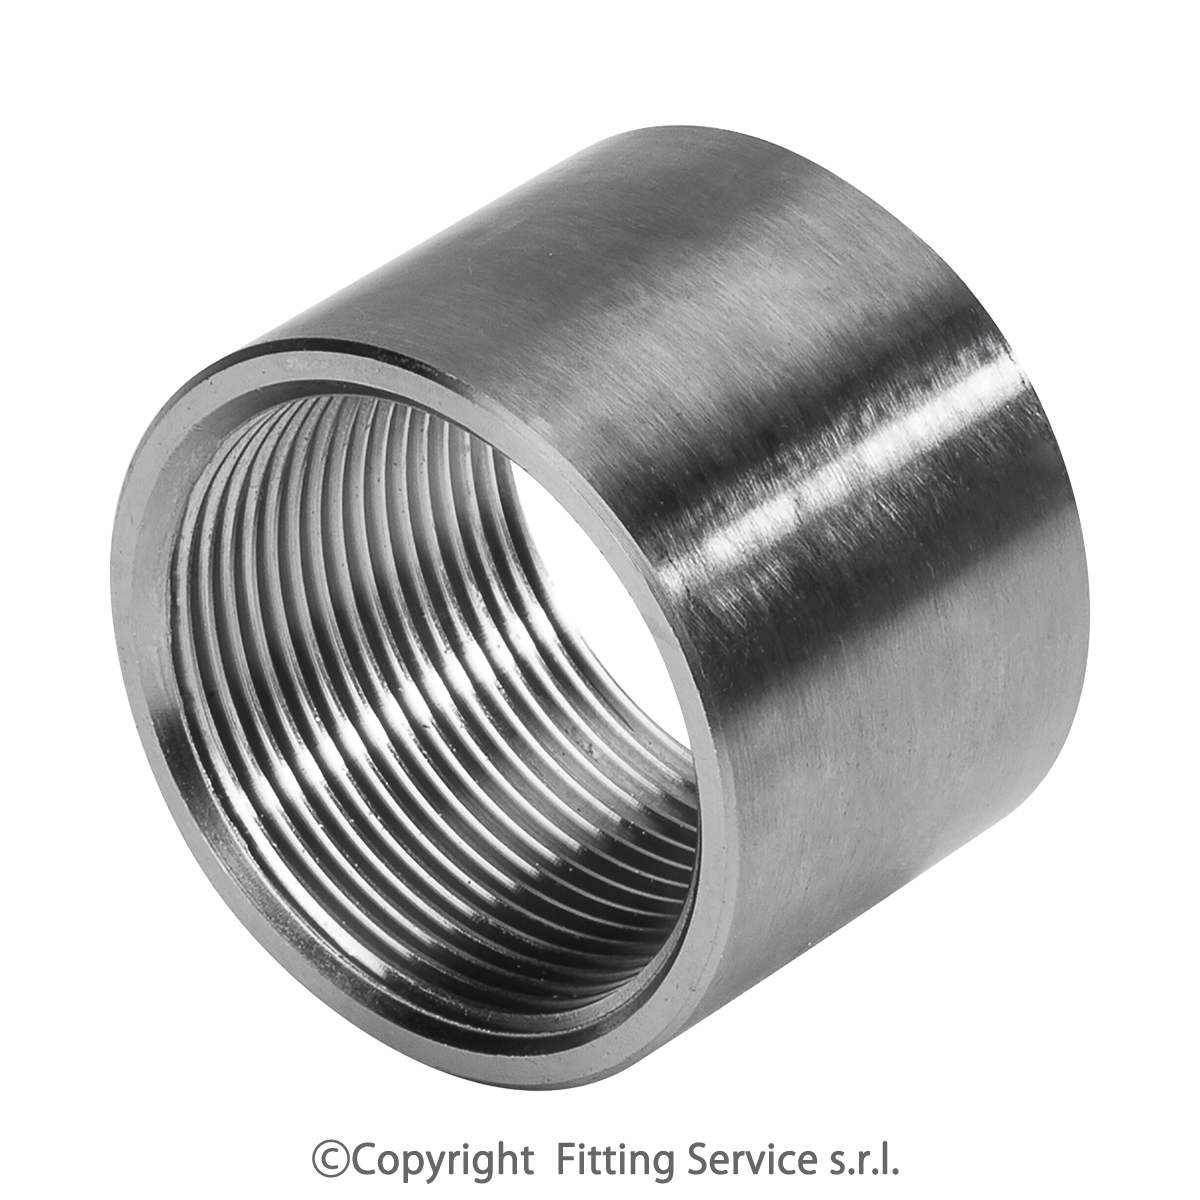 Coupling  Fitting Service